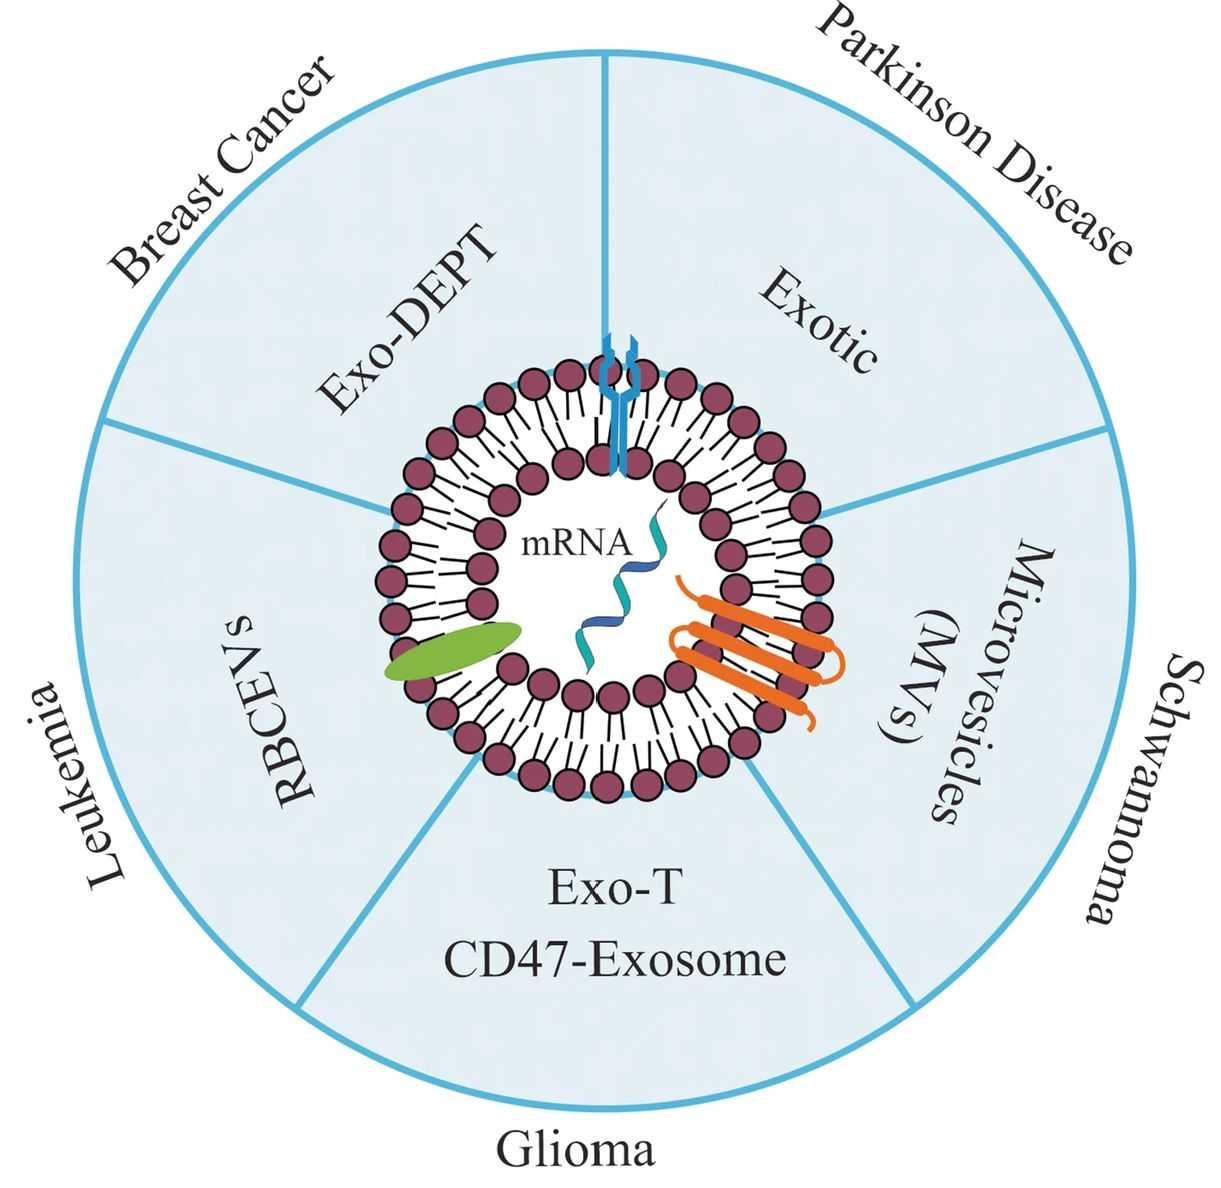 Figure 1. Delivery of mRNA by exosomes in medicine.